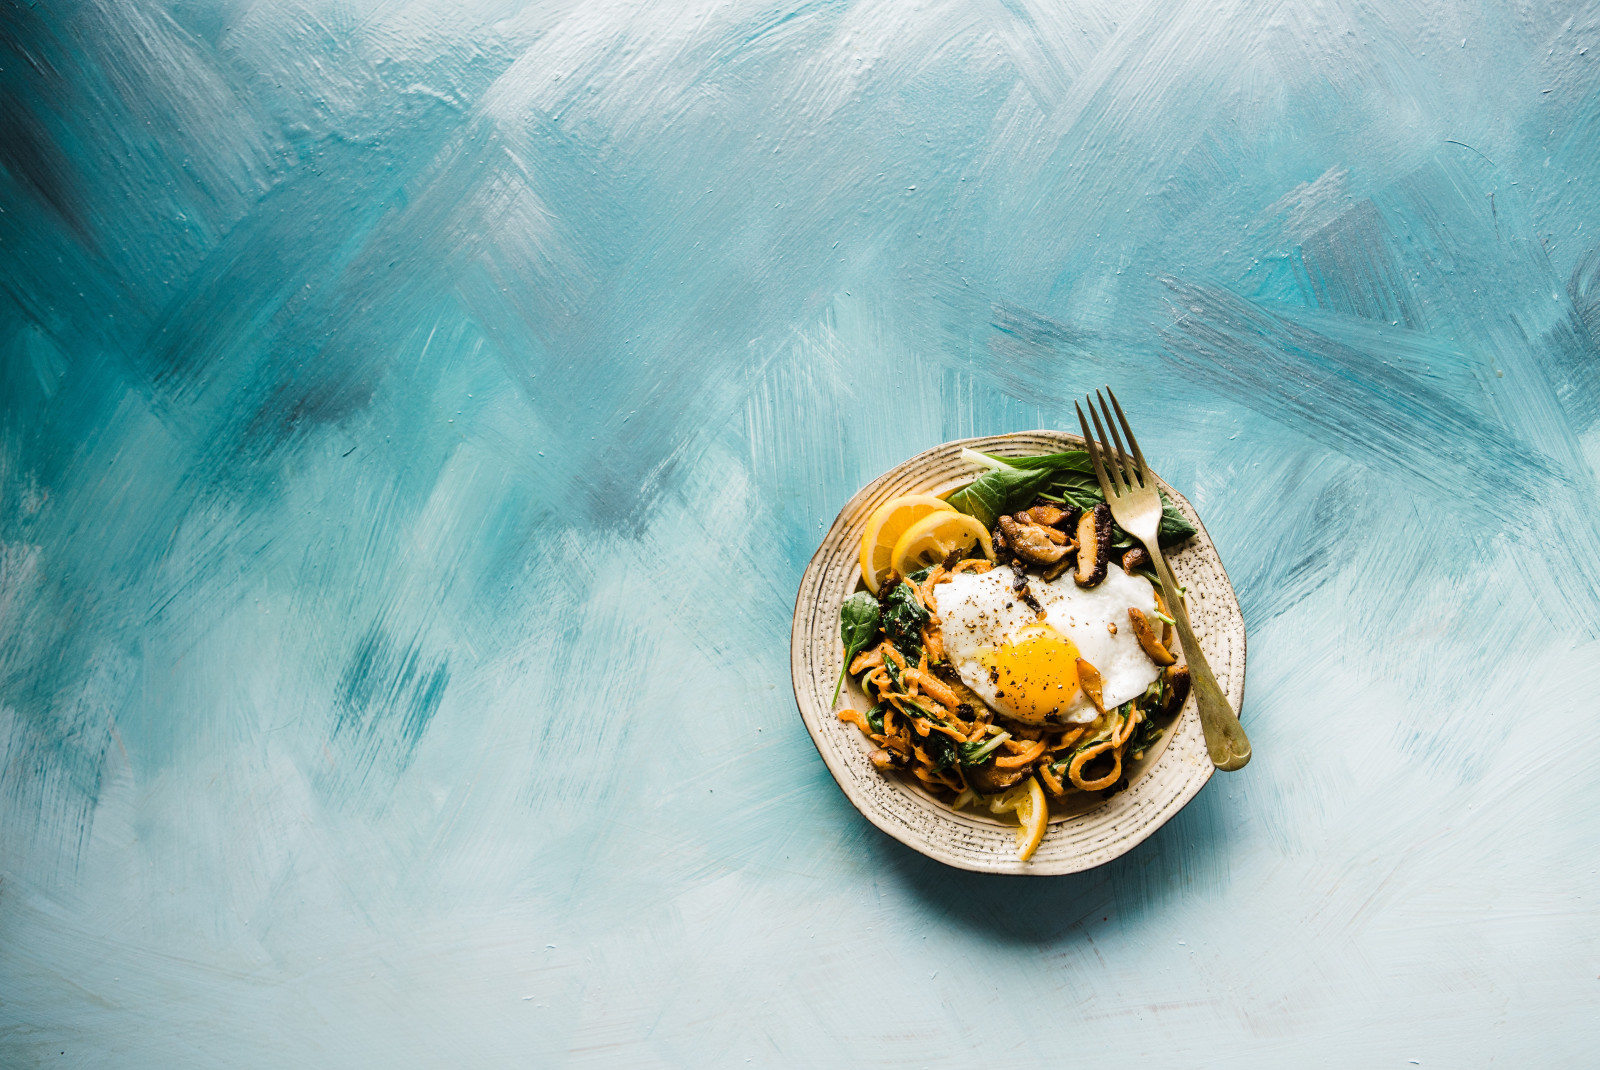 Plate of egg and greens on a blue and white table